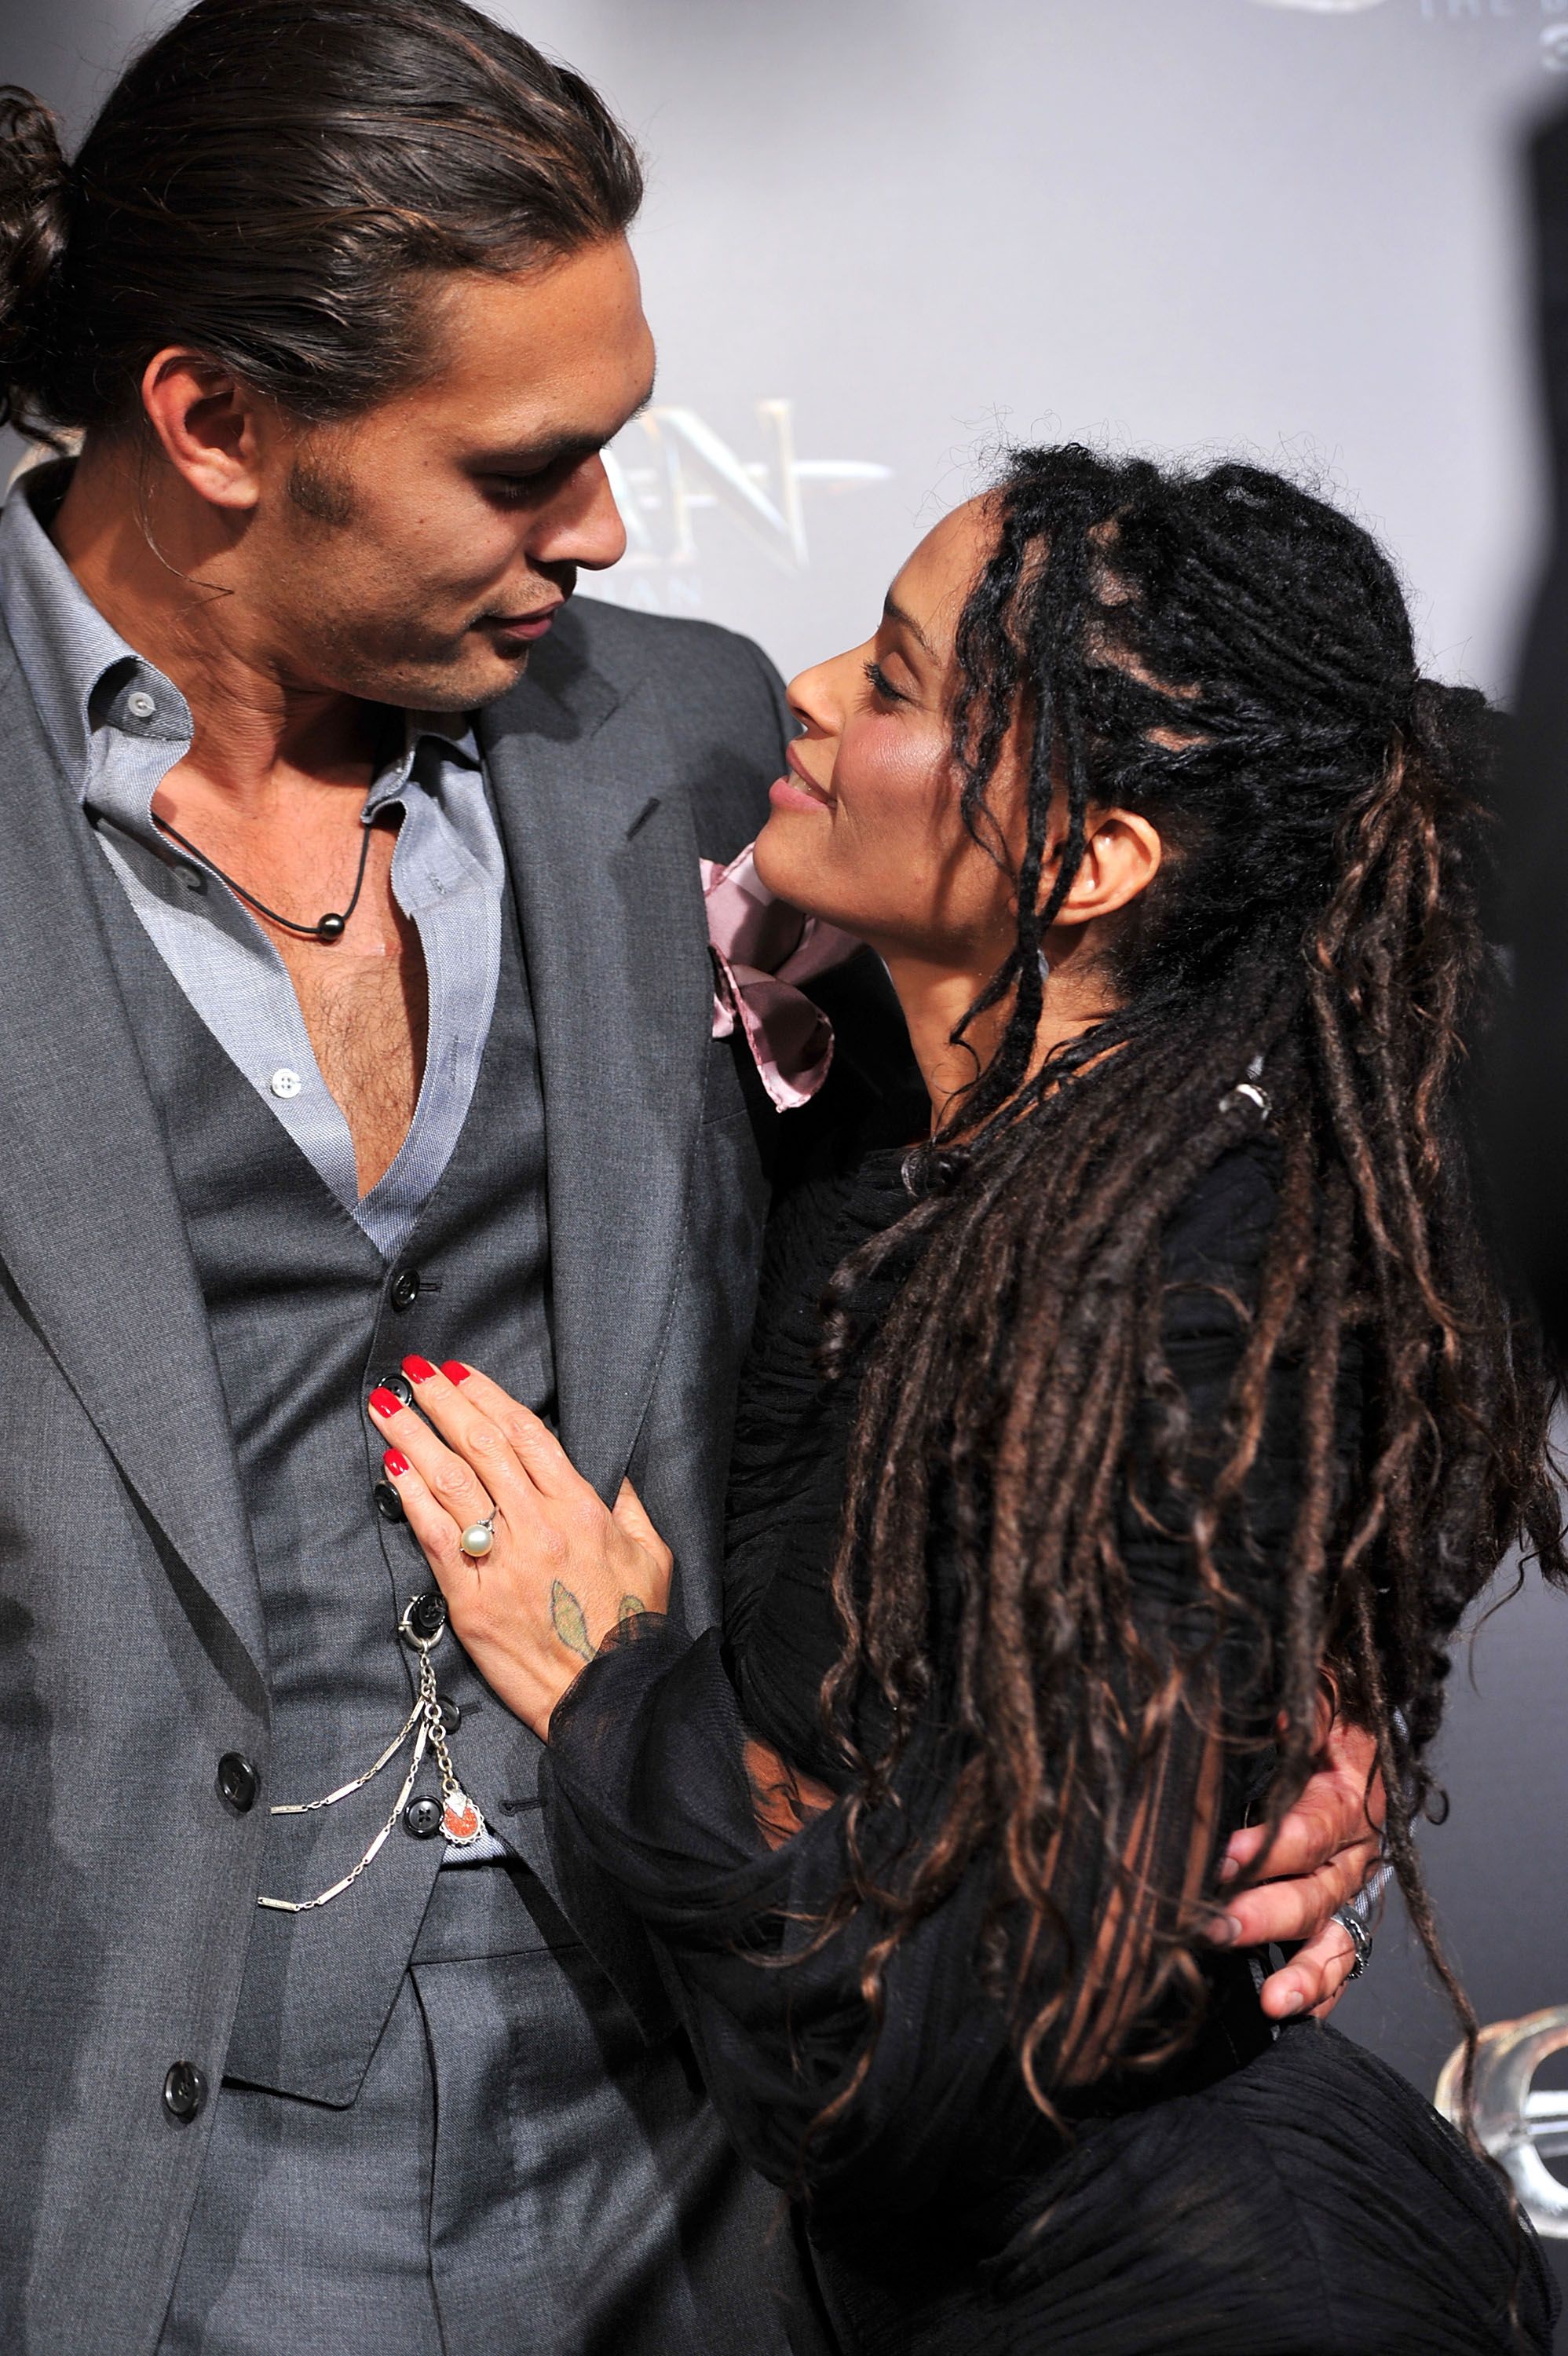 Jason Momoa and Lisa Bonet at the premiere of "Conan The Barbarian" on August 11, 2011  | Photo: Getty Images